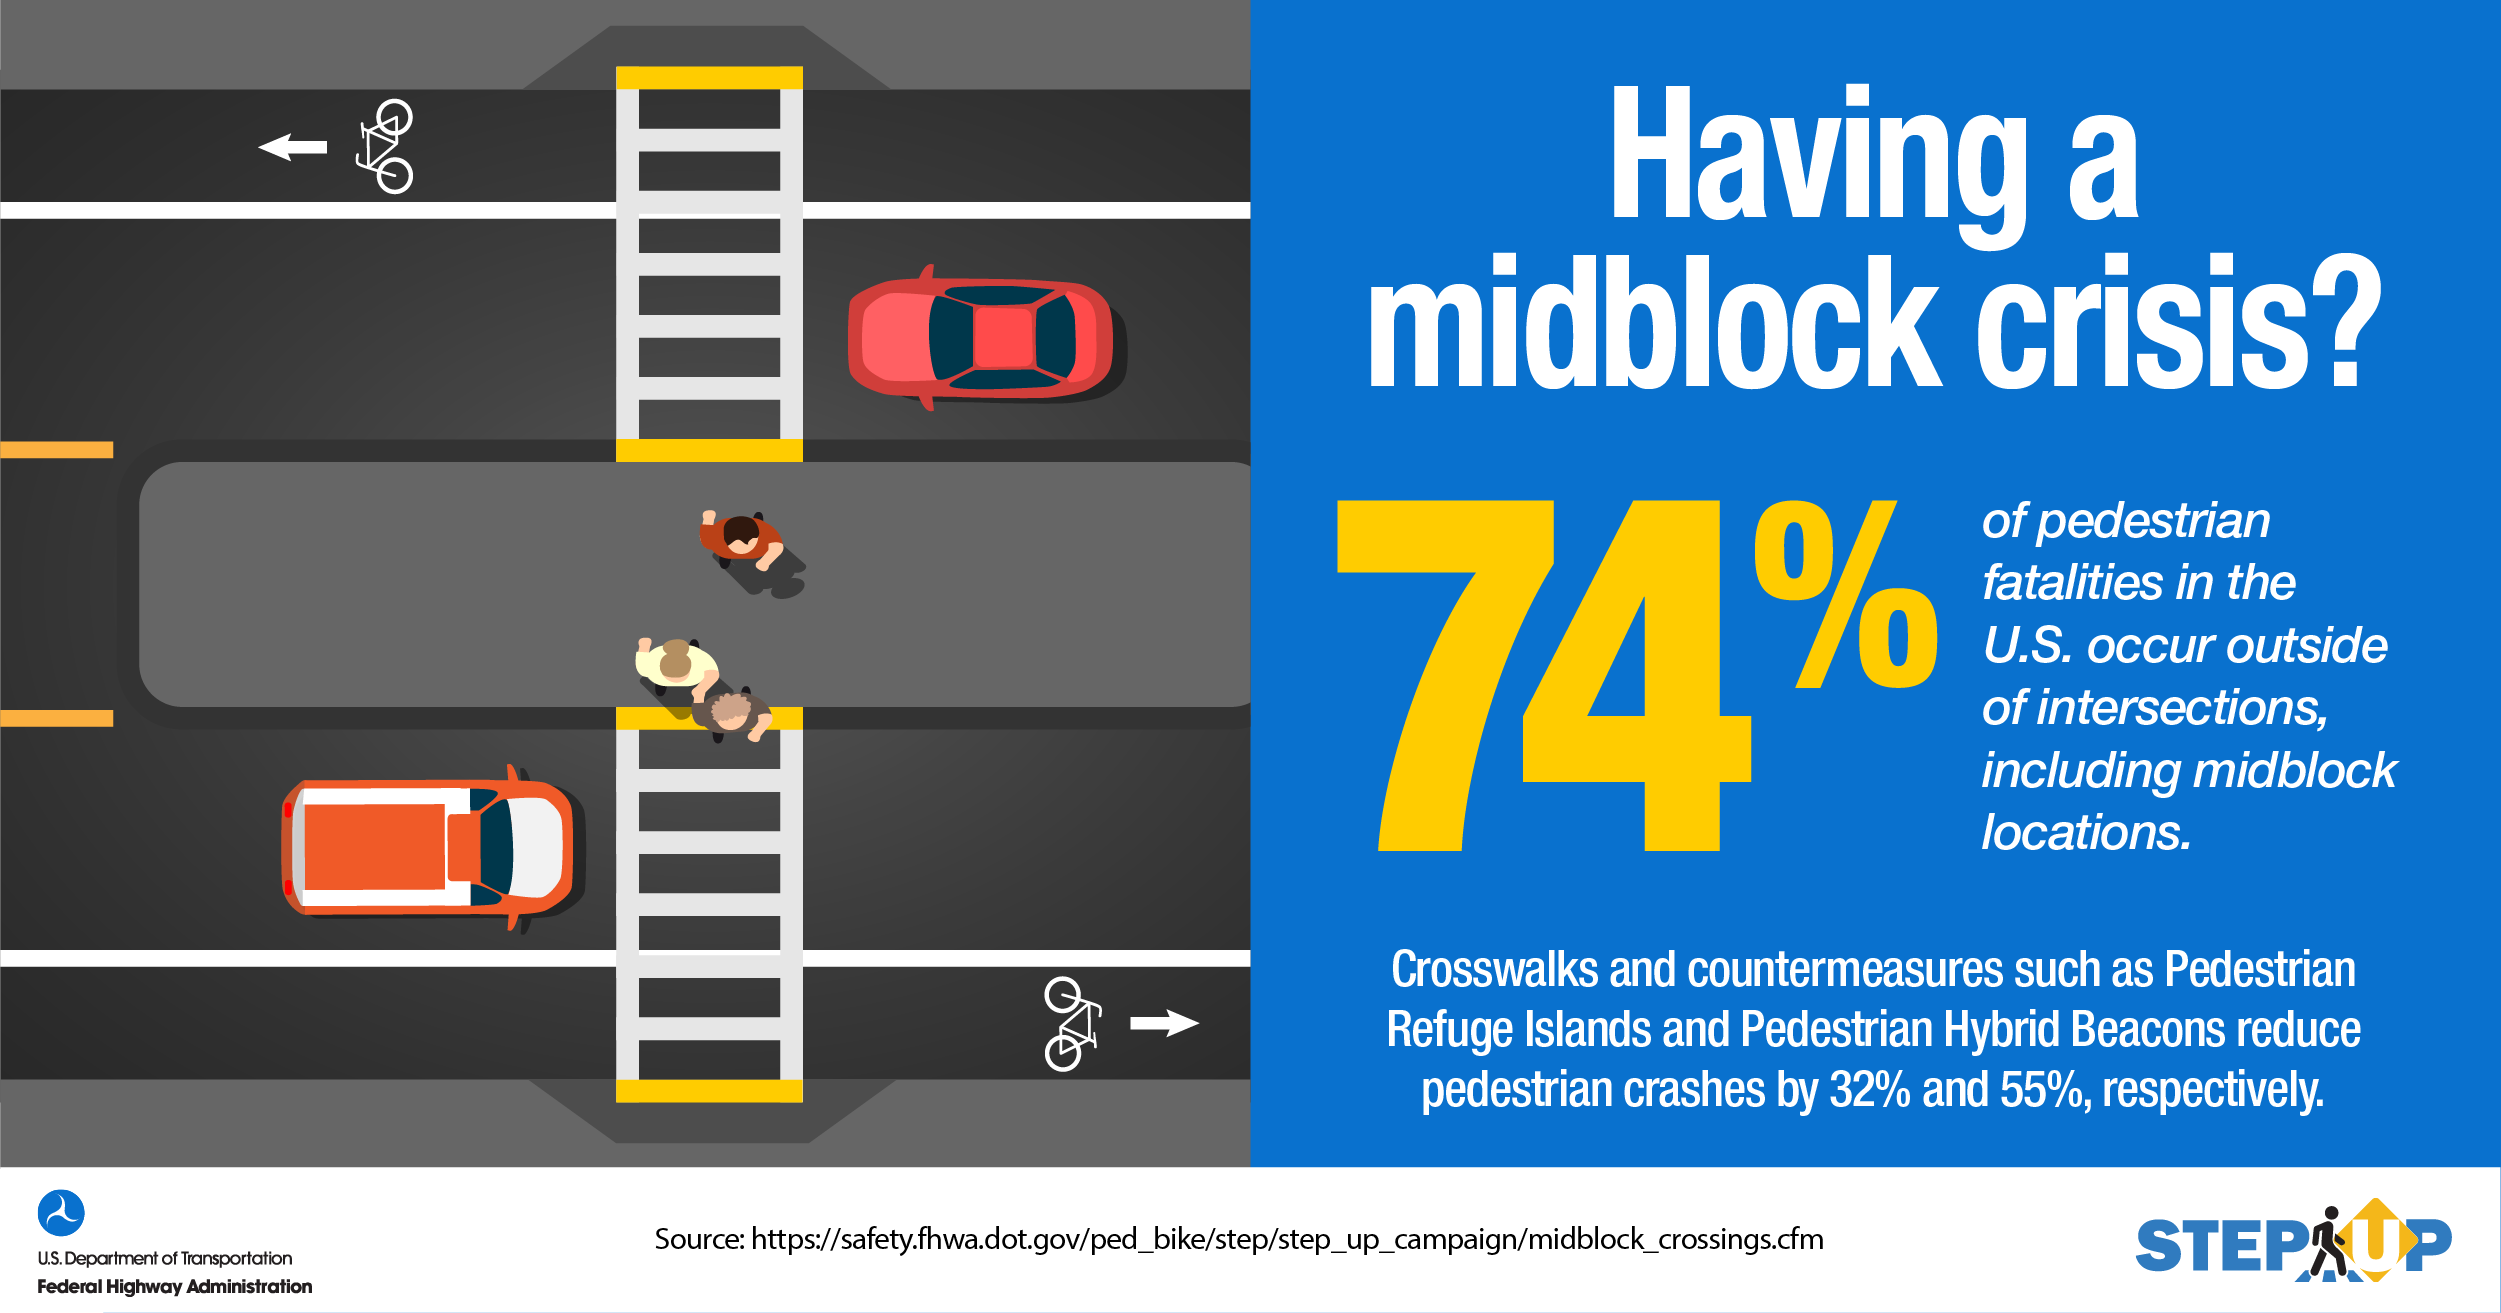 STEP infographic of overhead view of multi-lane traffic with a crosswalk, separated by a median. “Having a midblock crisis? 74% of pedestrian fatalities in the U.S. occur outside of intersections including midblock locations. Crosswalks and countermeasures such as Pedestrian Refuge Islands and Pedestrian Hybrid Beacons reduce pedestrian crashes by 32% and 55% respectively.”